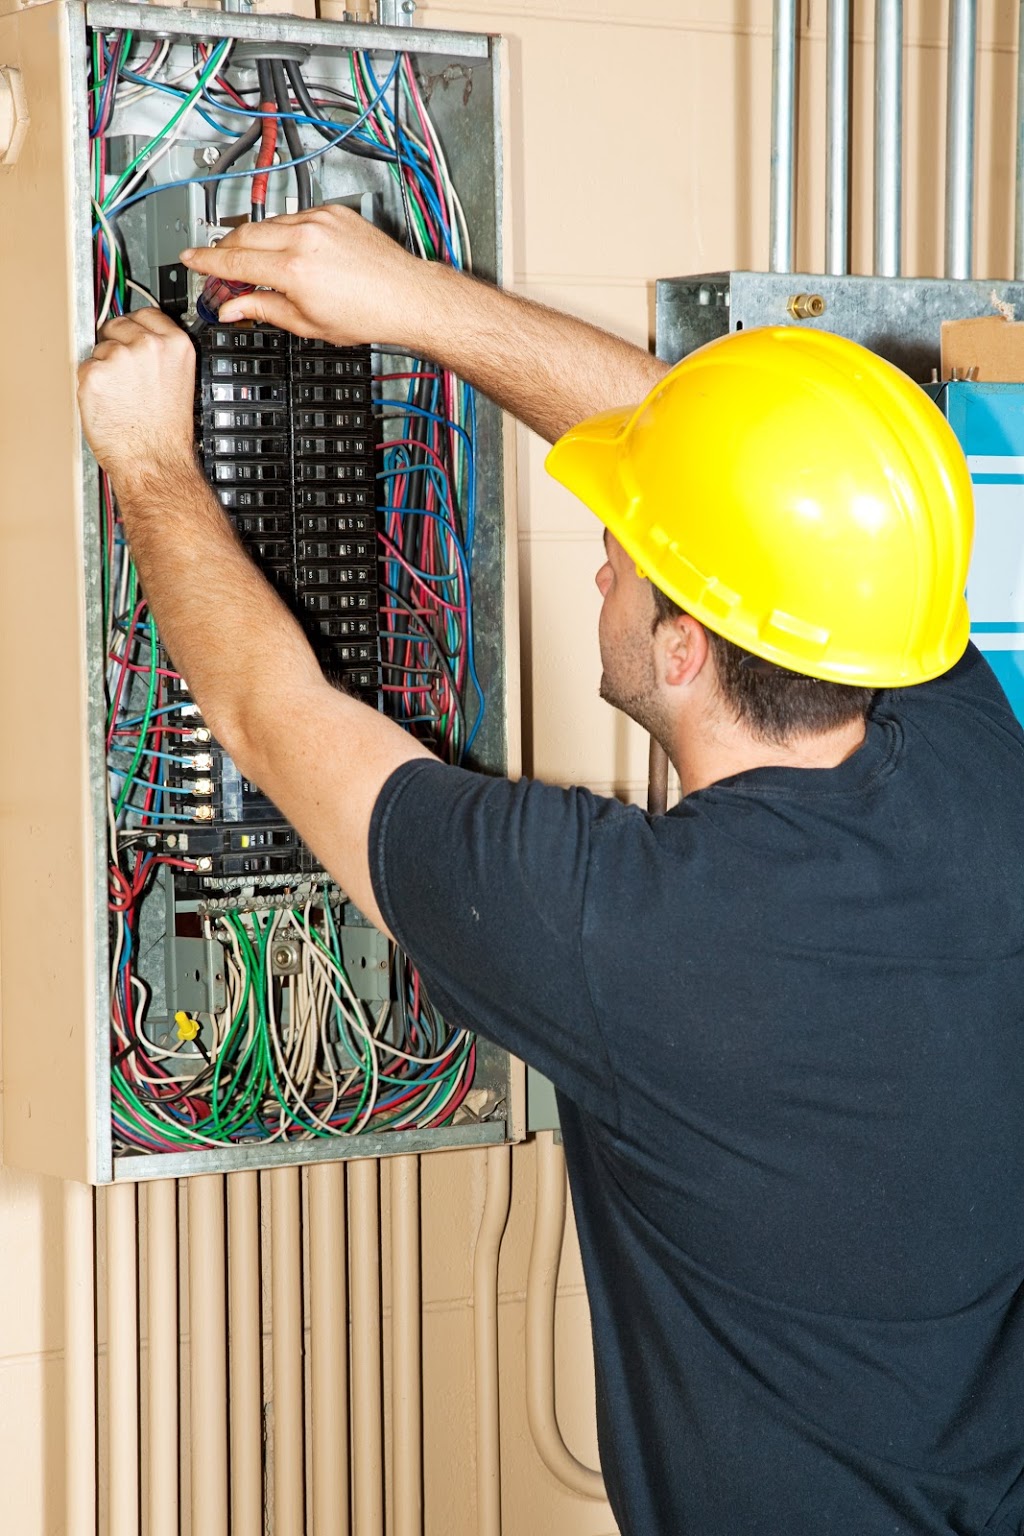 Beverly Hills Electrician | Level 2 Electrcian Beverly Hil, No Power Electrician, Emergency Electric Connect, Beverly Hills NSW 2209, Australia | Phone: 0488 825 557